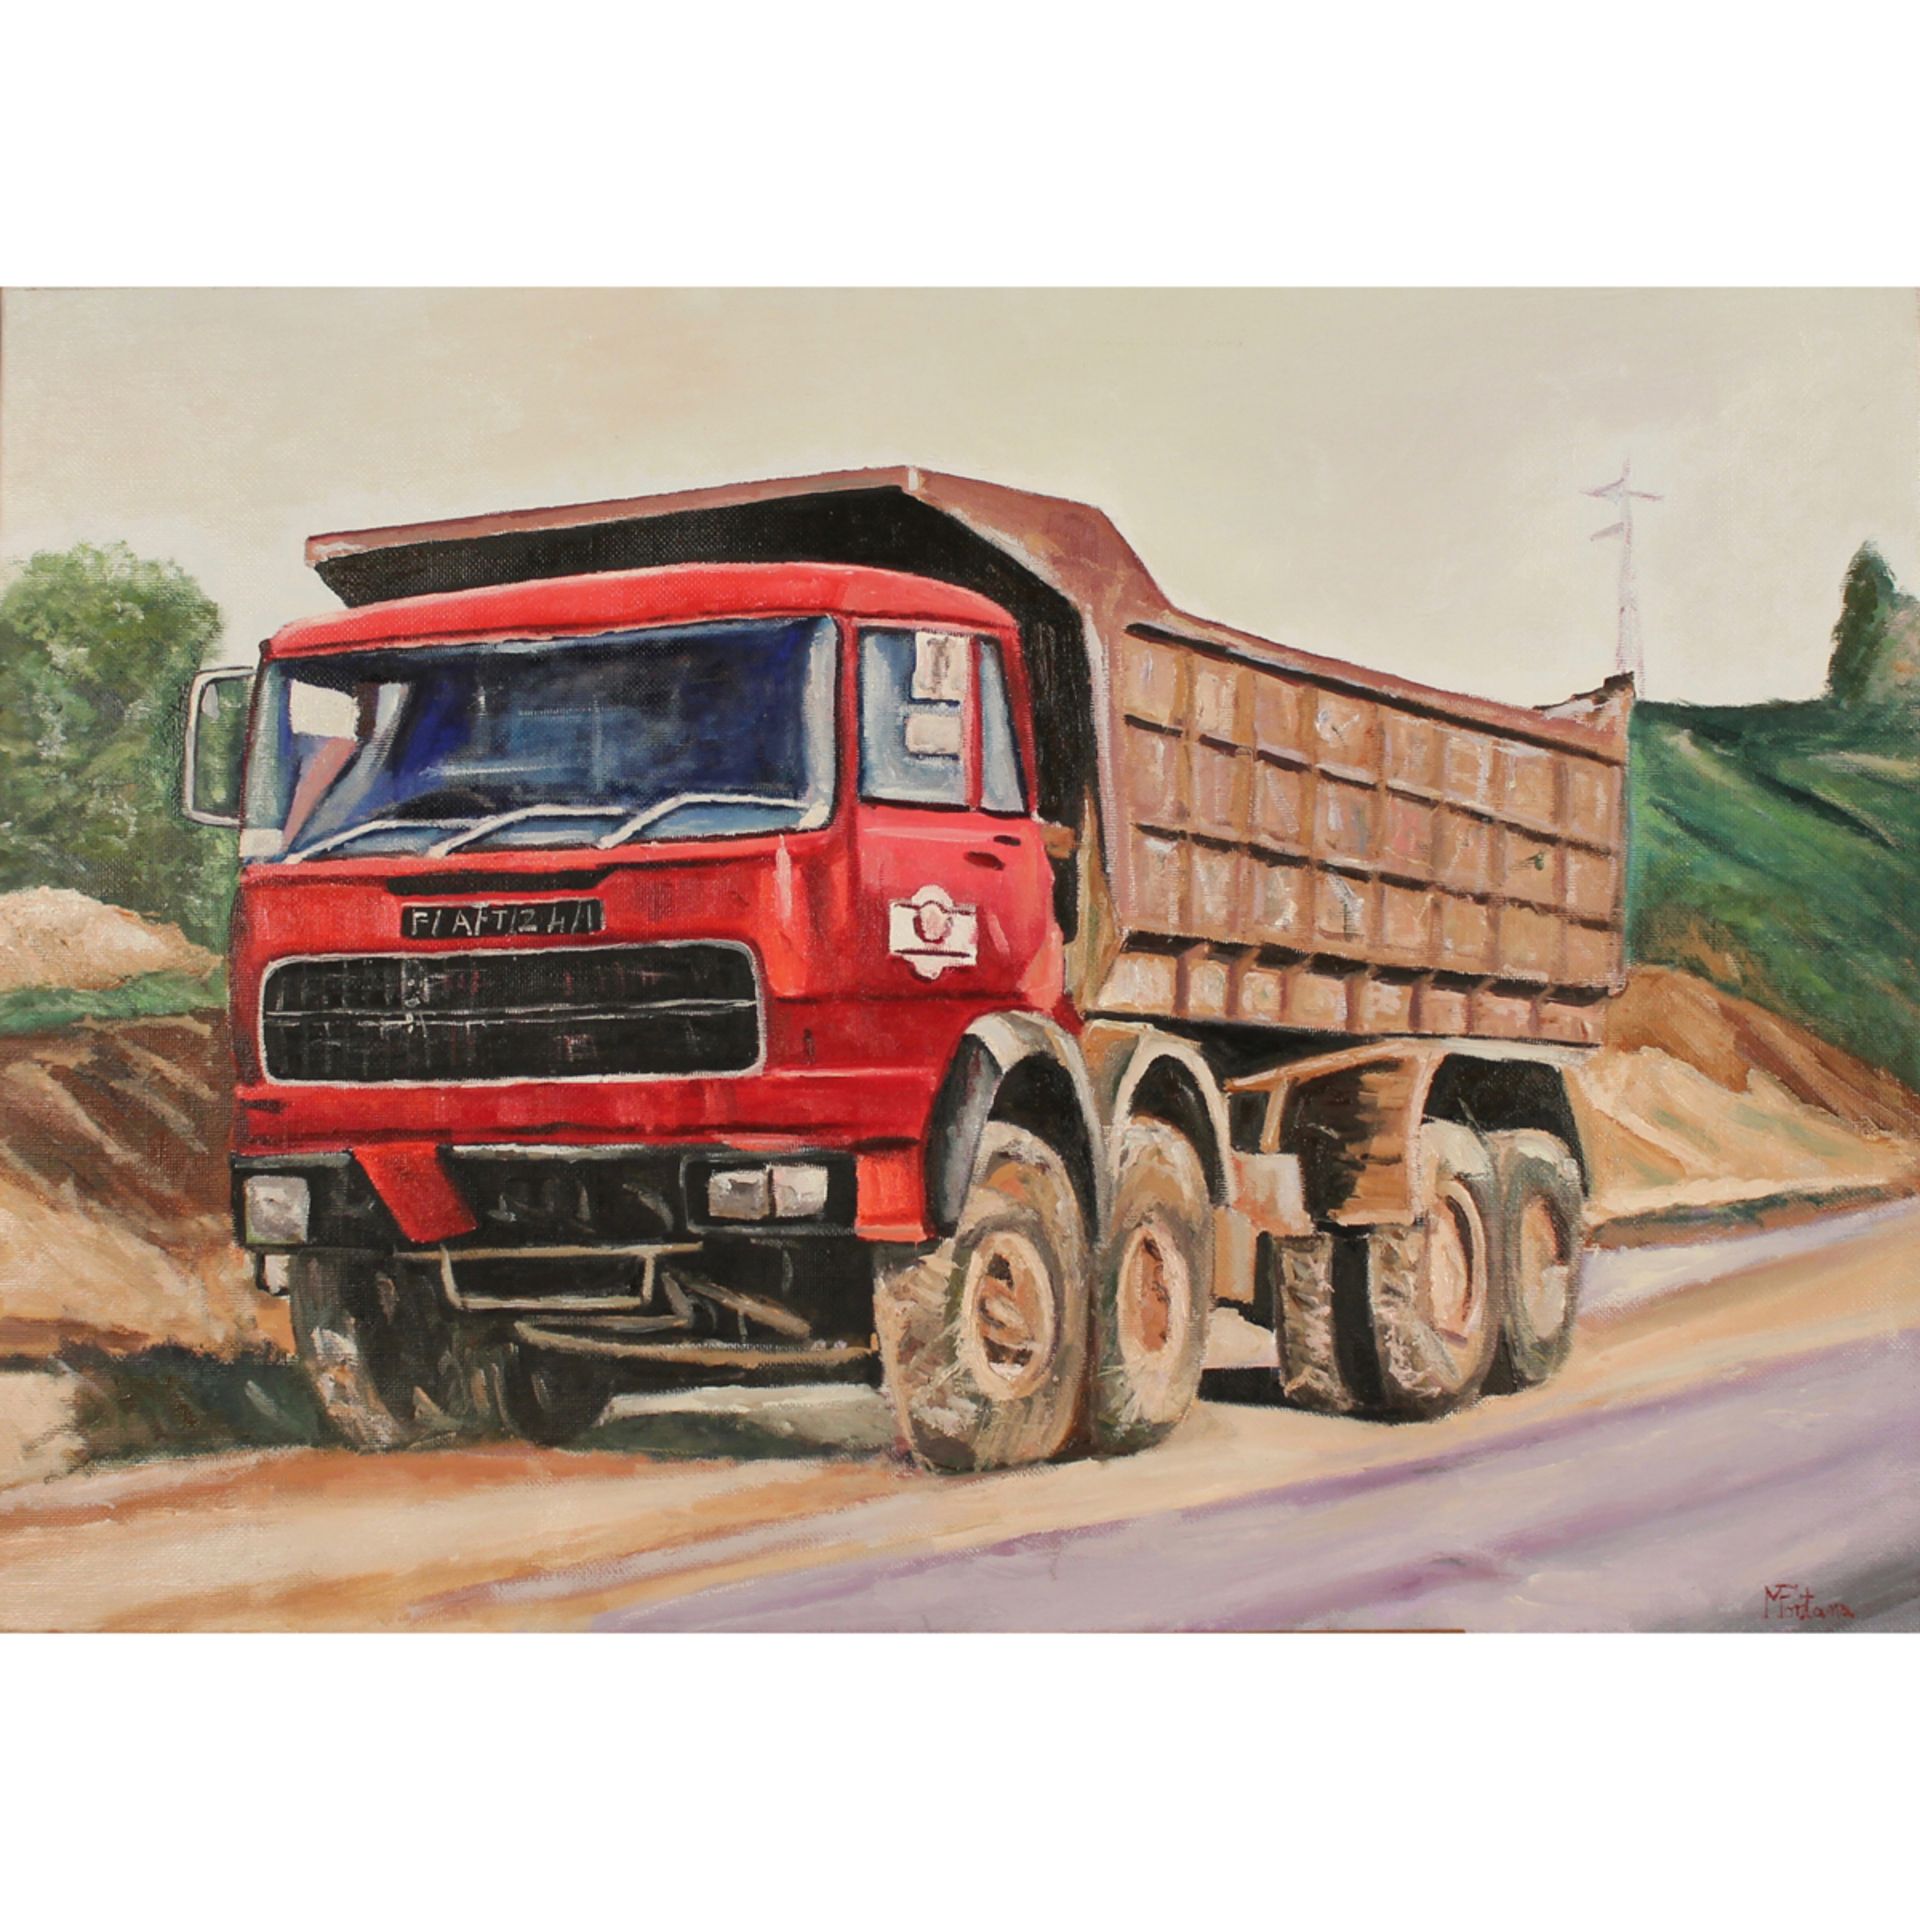 MICHELE FONTANA (1965) "Camion rosso" - "Red truck"